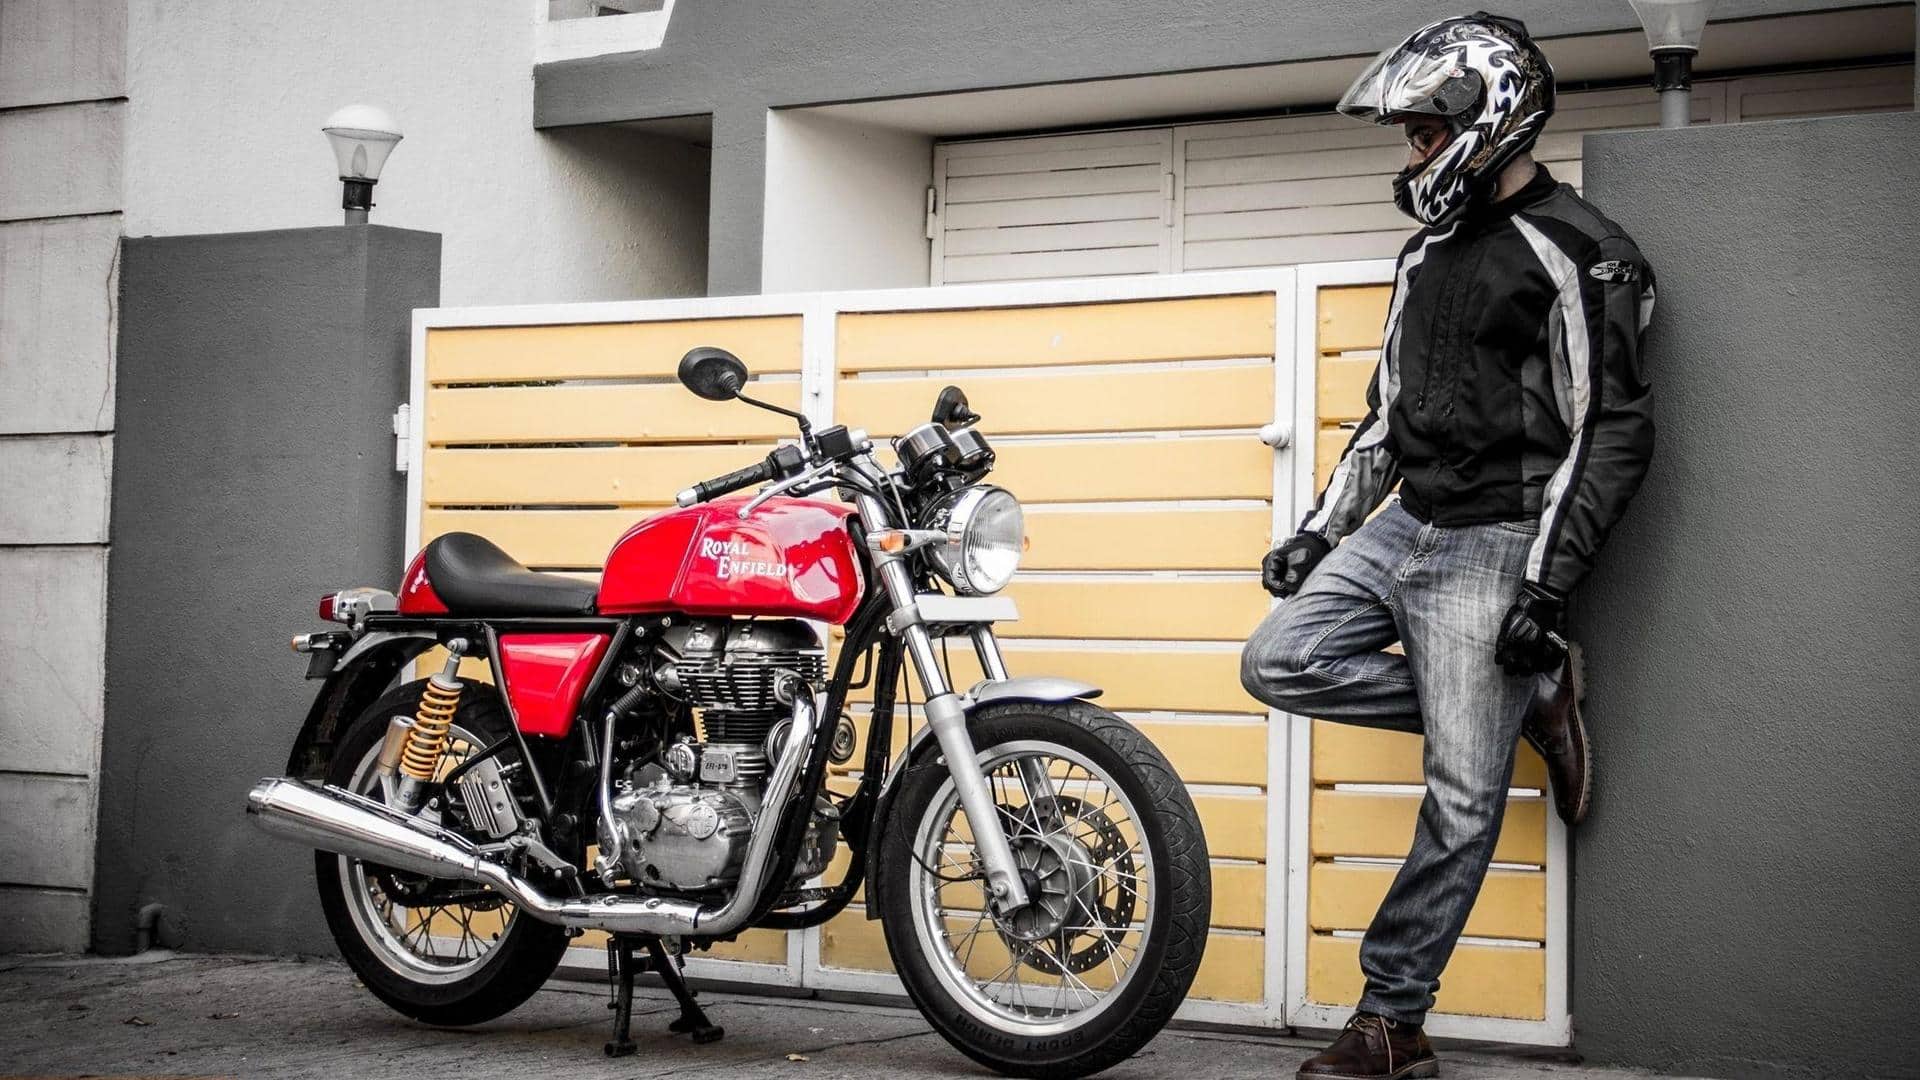 How Continental GT 535 helped in shaping Royal Enfield's future